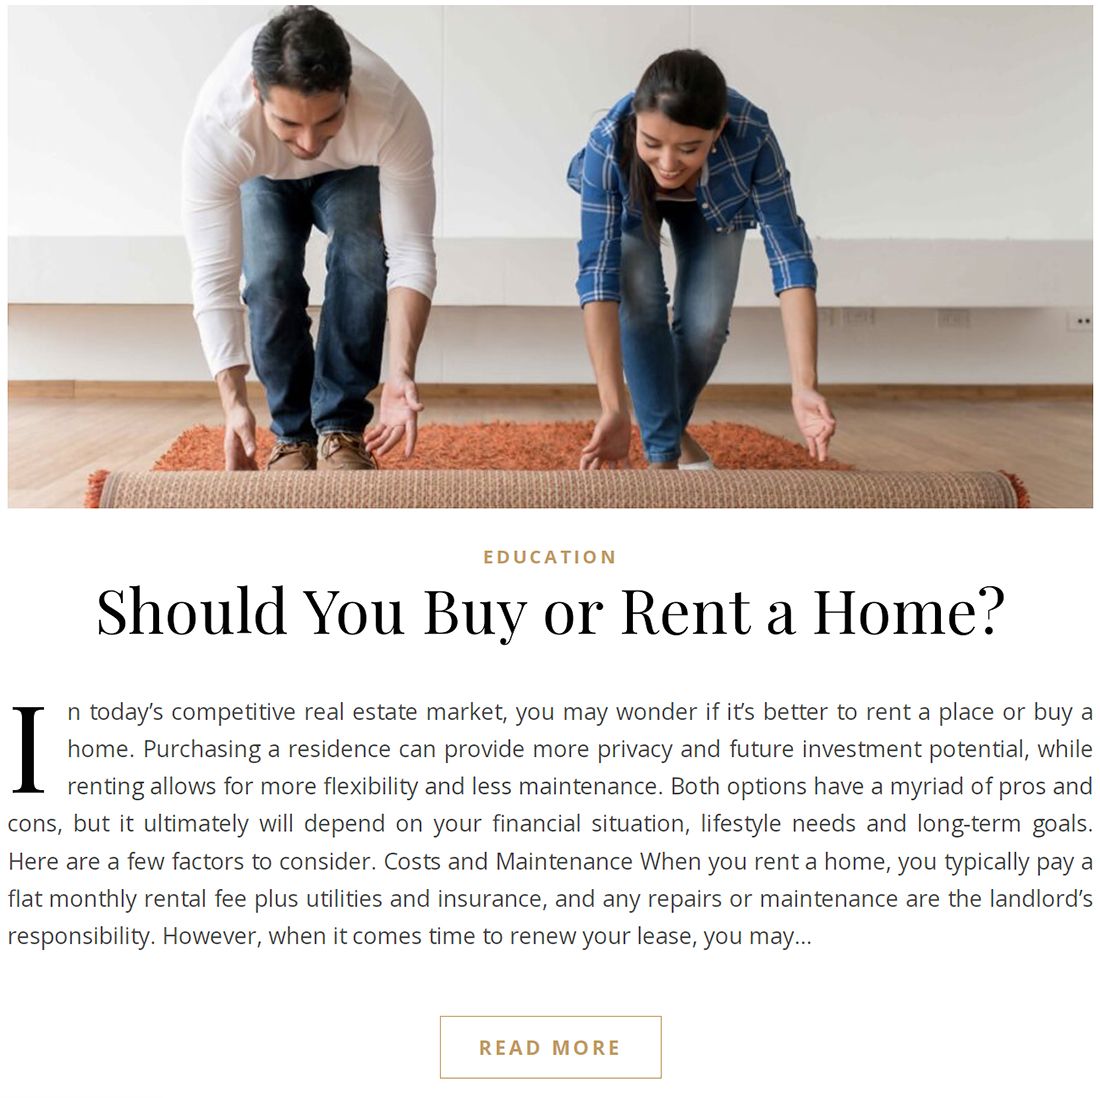 Buy or Rent a Home